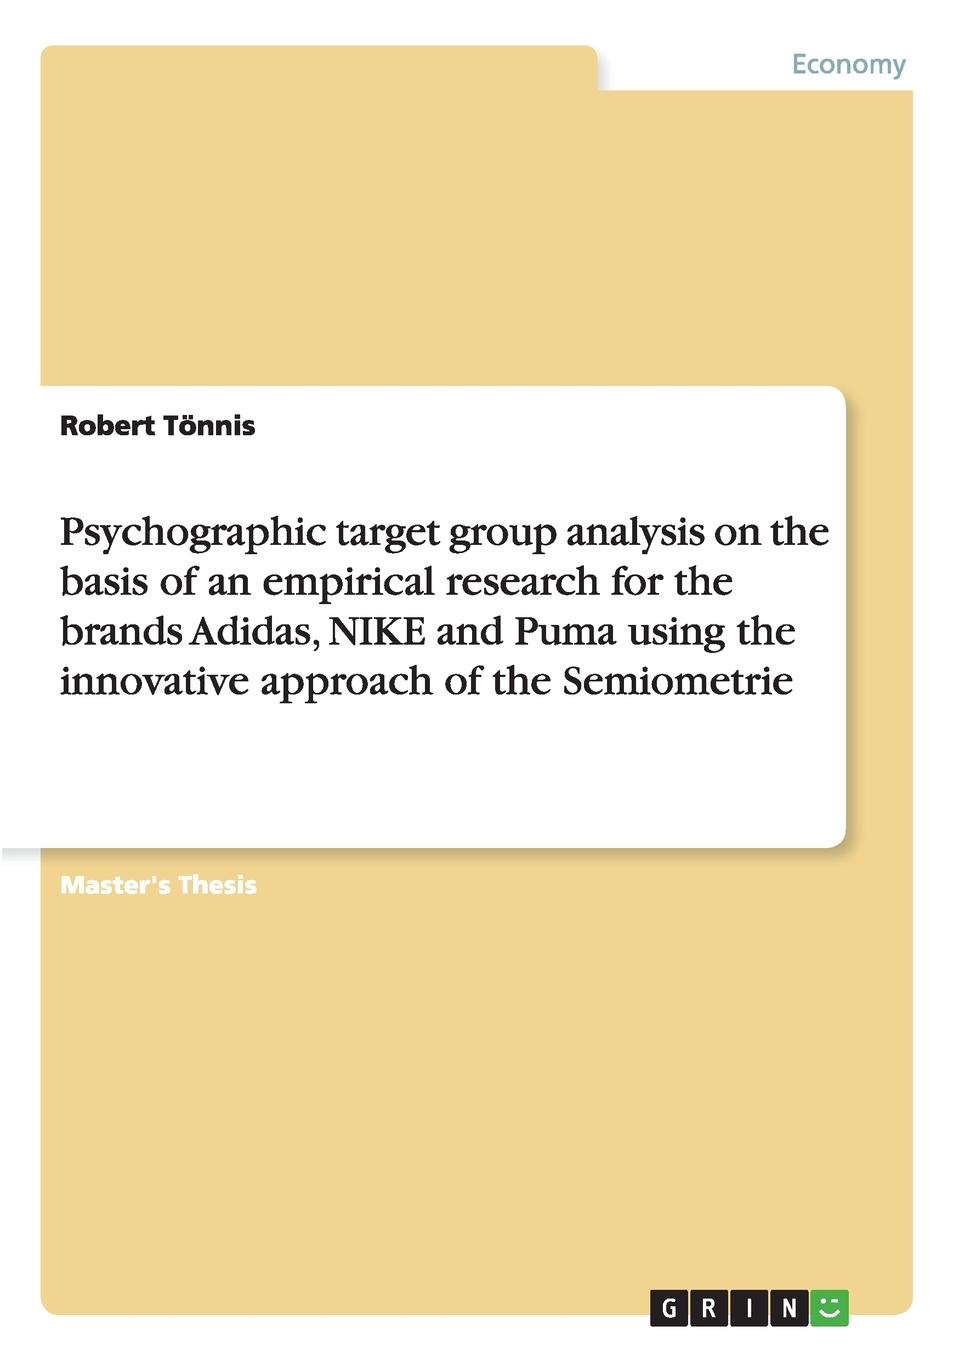 Psychographic target group analysis on the basis of an empirical research for the brands Adidas, NIKE and Puma using the innovative approach of the Semiometrie